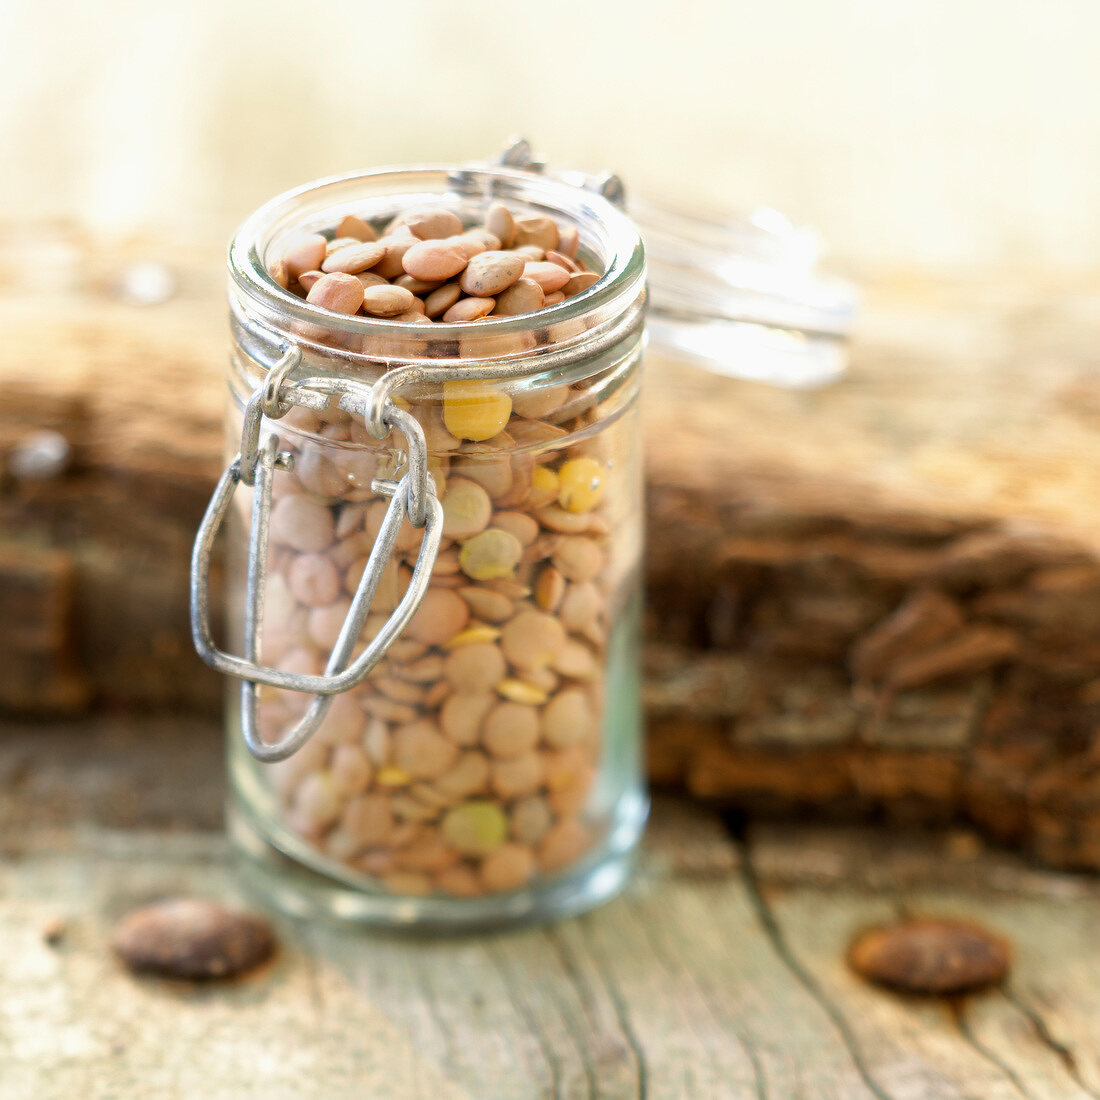 Small glass jar of pink lentils